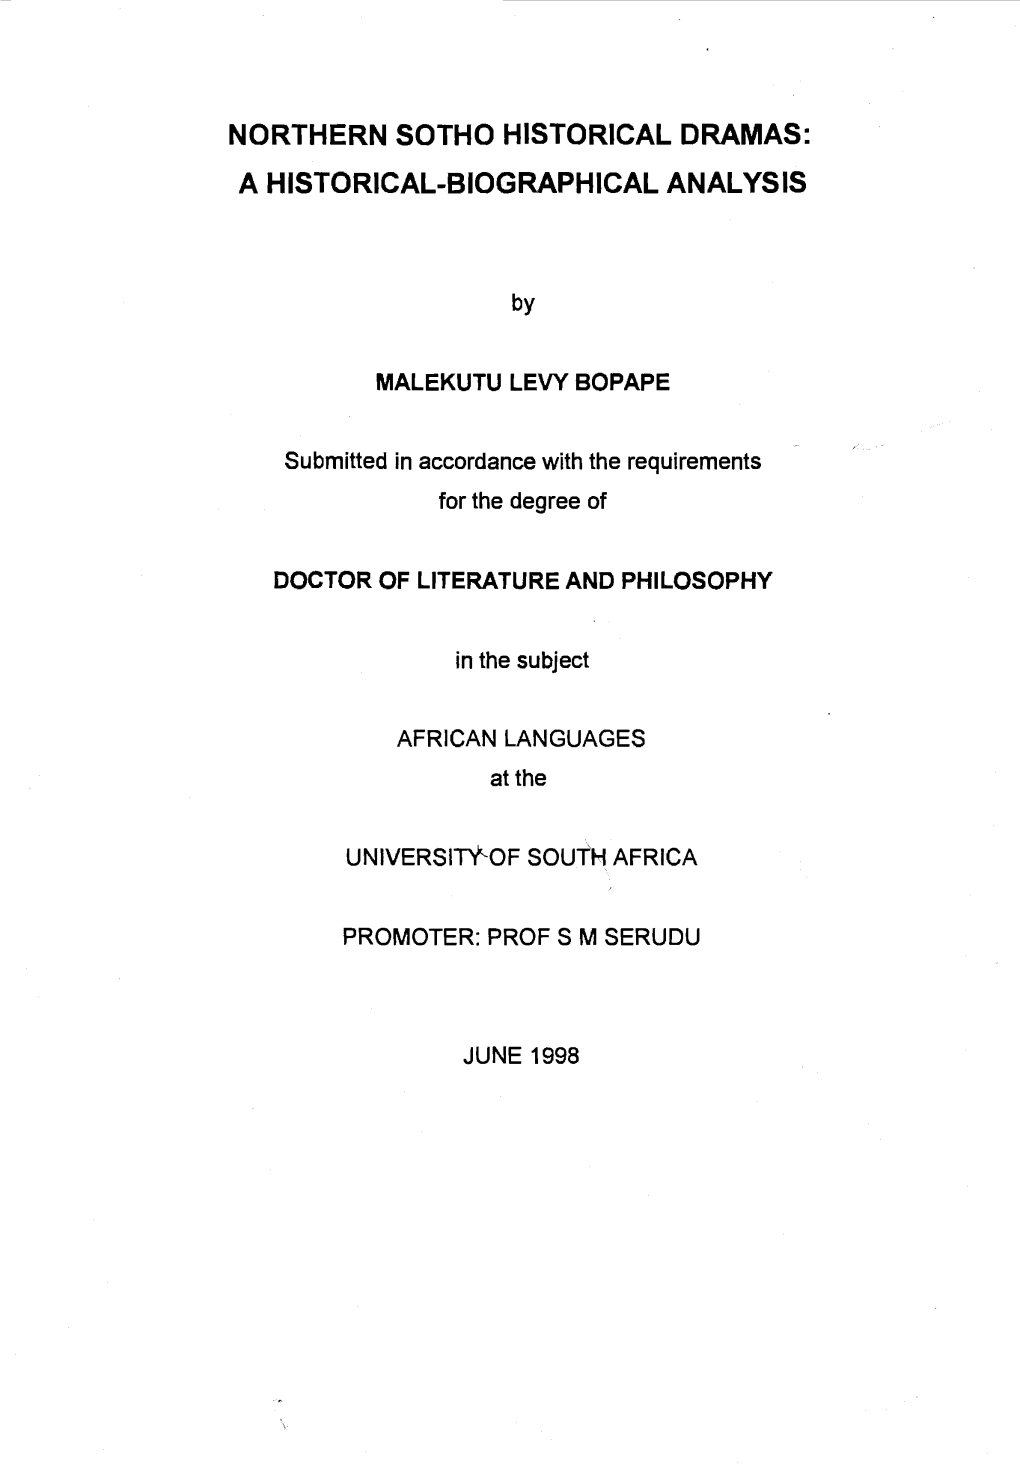 Northern Sotho Historical Dramas: a Historical-Biographical Analysis